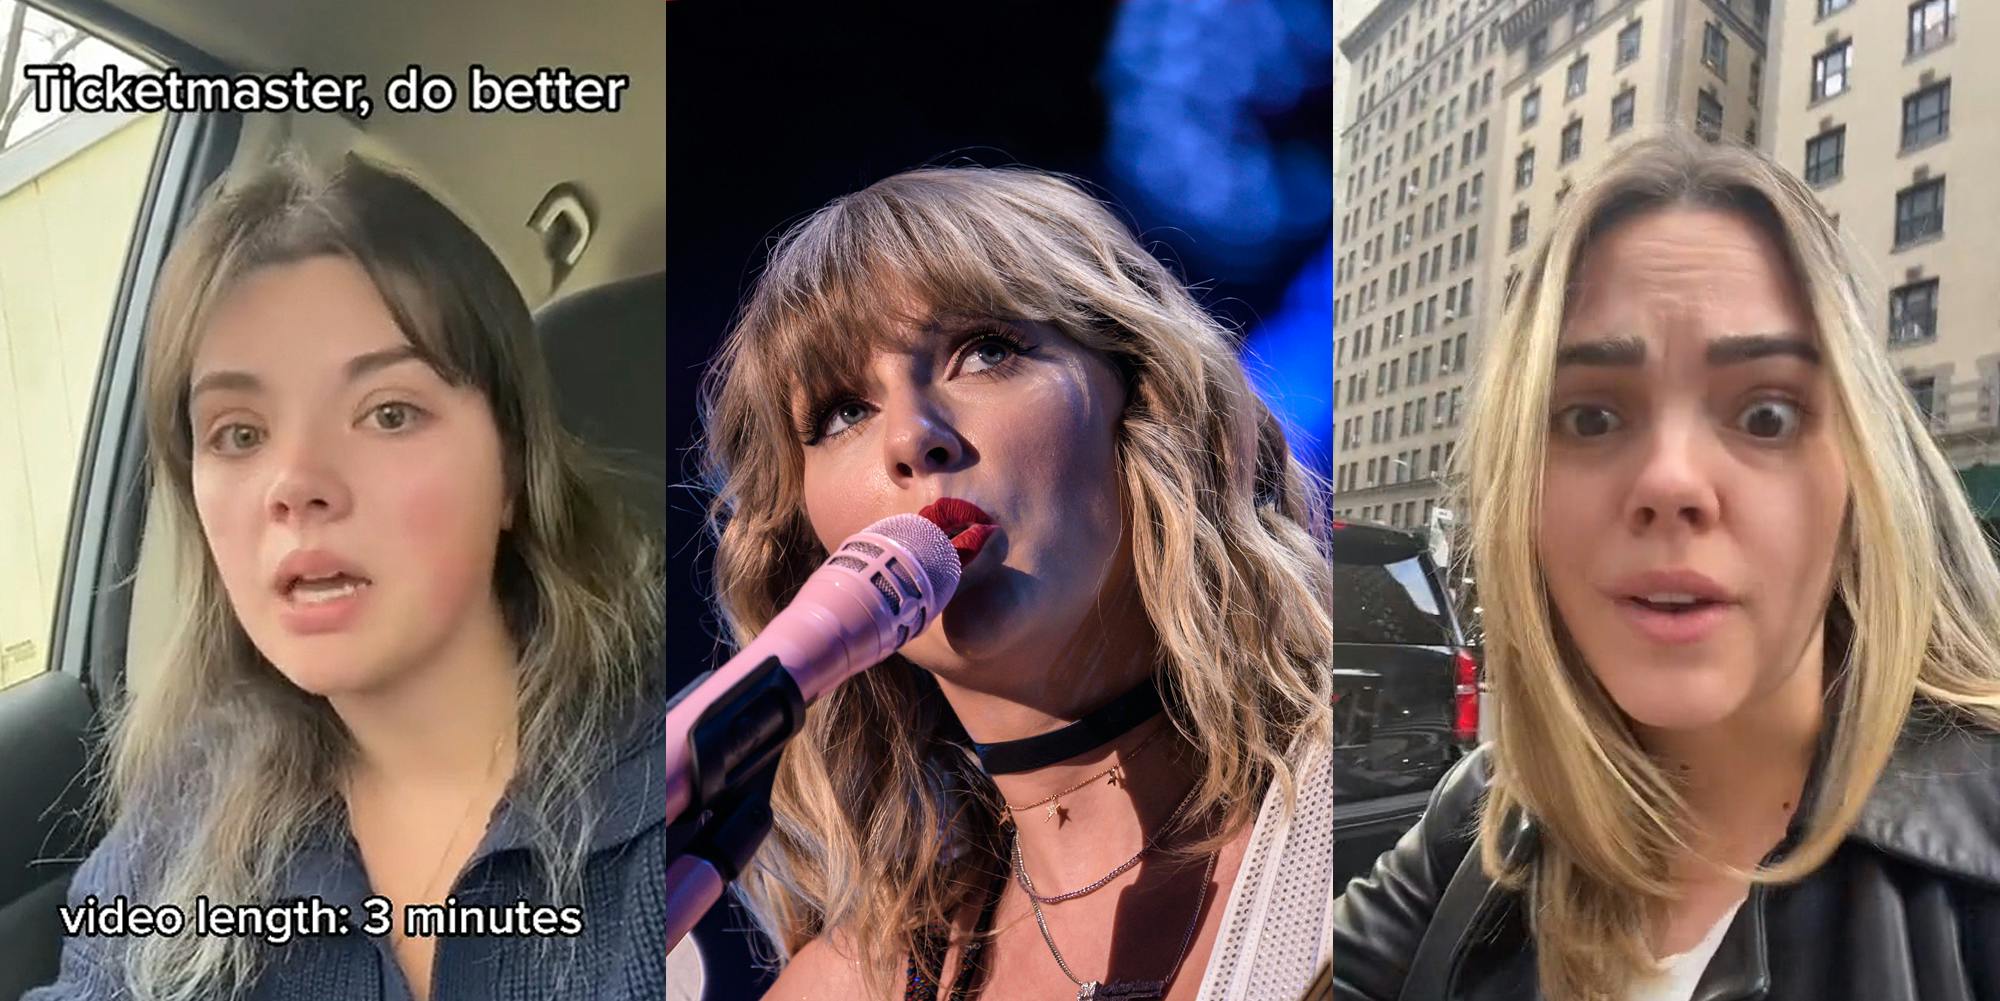 woman speaking in car caption "Ticketmaster, do better video length: 3 minutes" (l) Taylor Swift singing (c) woman speaking outside in city (r)